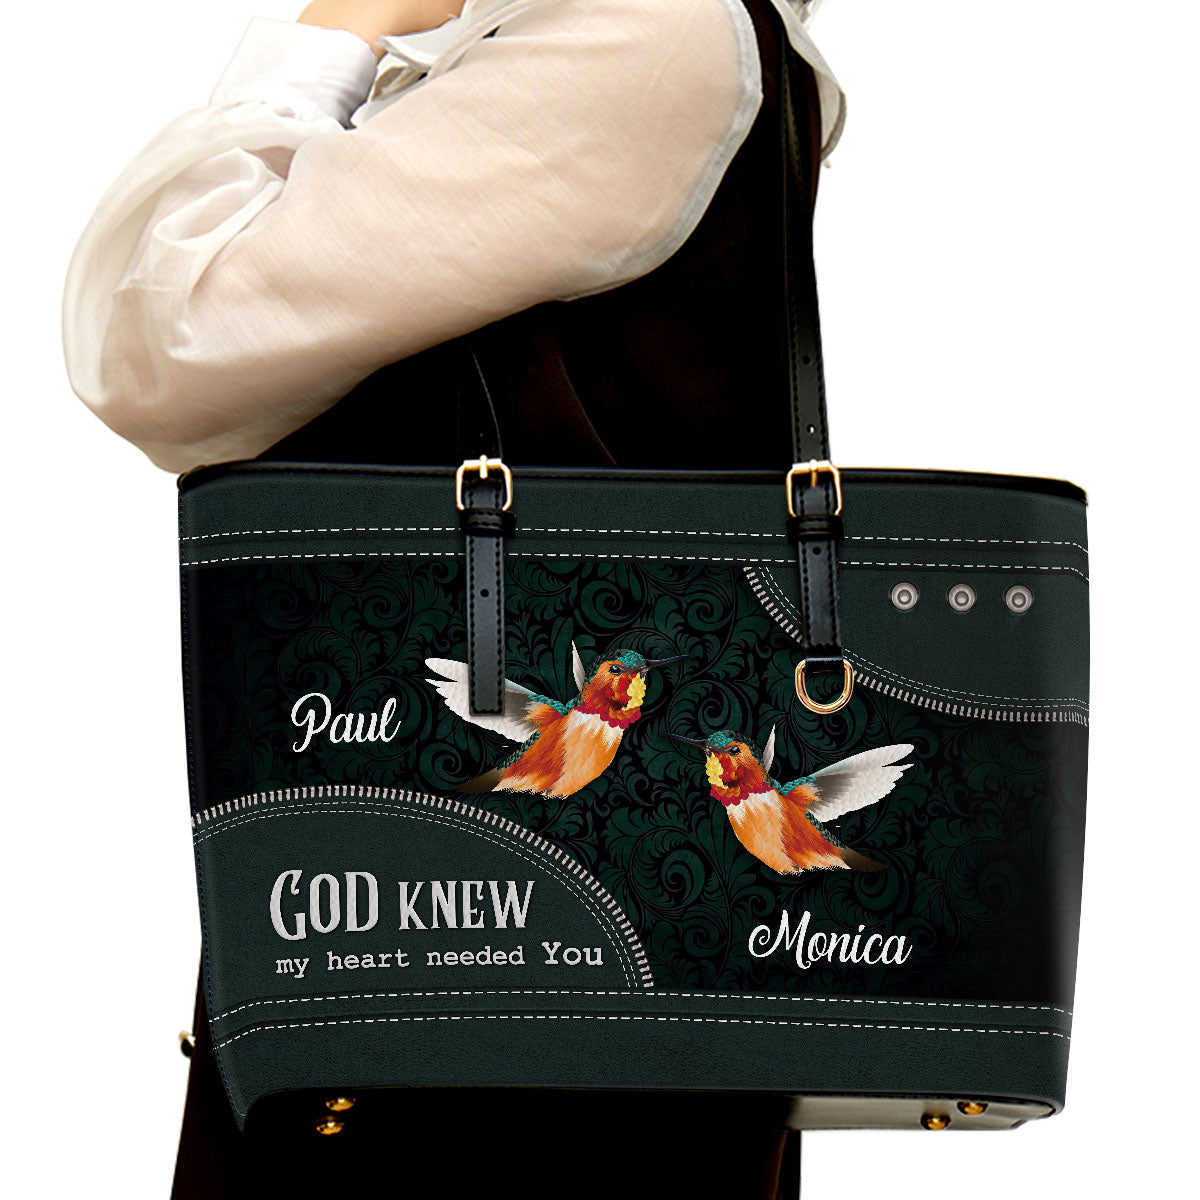 God Knew My Heart Needed You Personalized Large Leather Tote Bag - Christian Gifts For Women